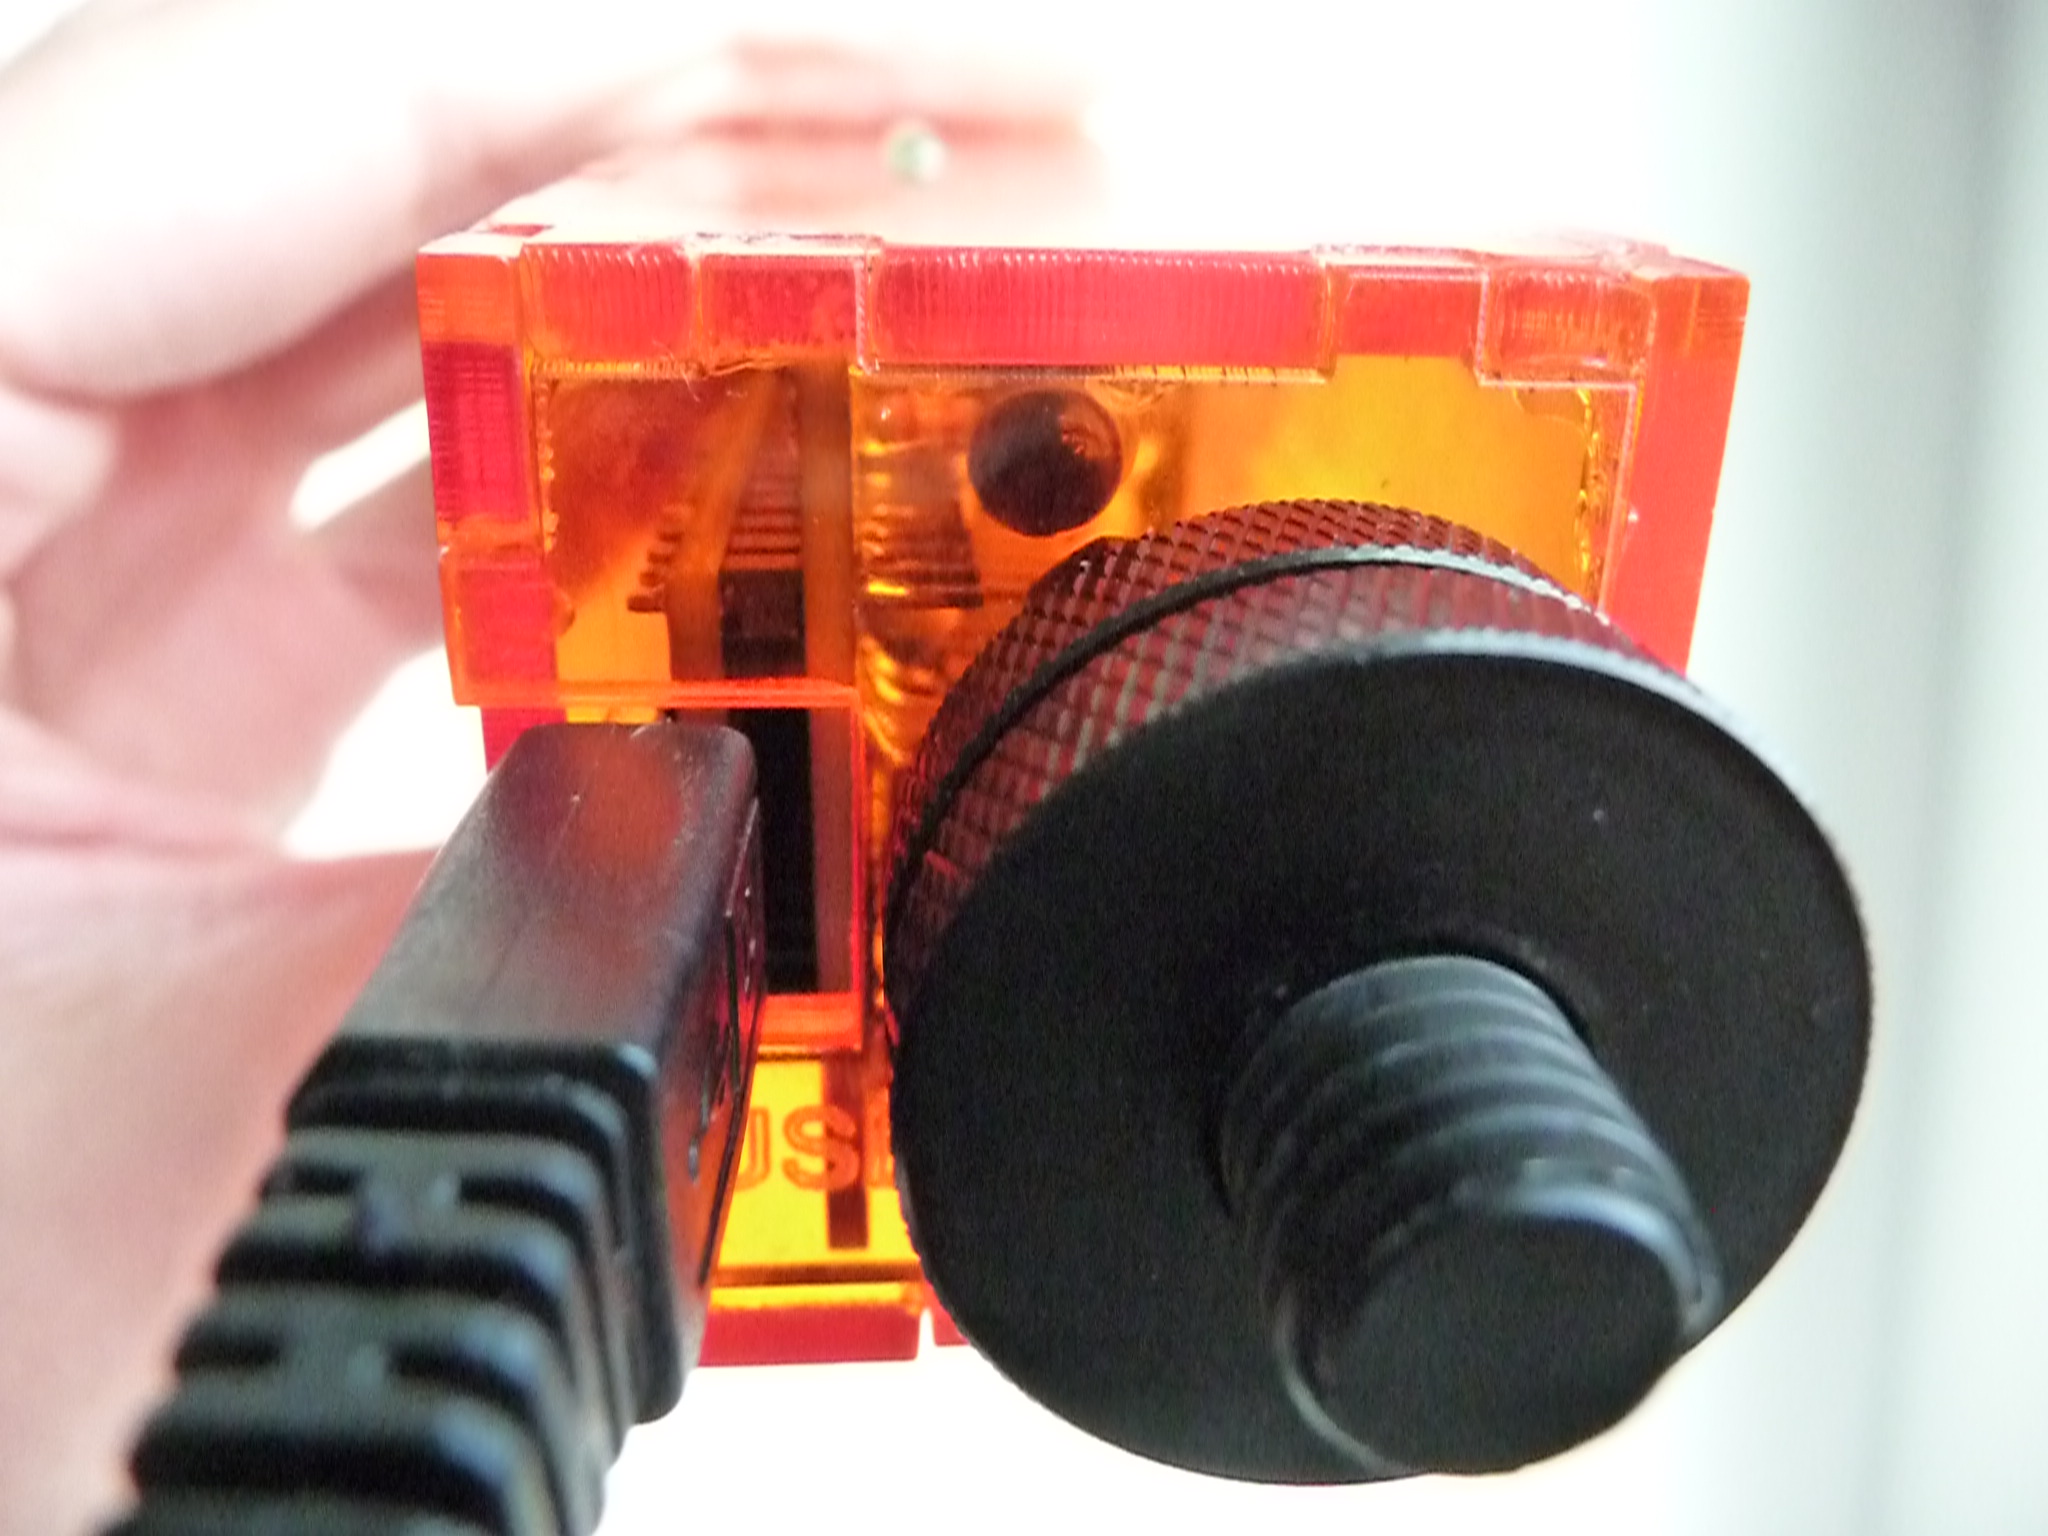 close-up of the FLipMouse casing and the infra-red LED